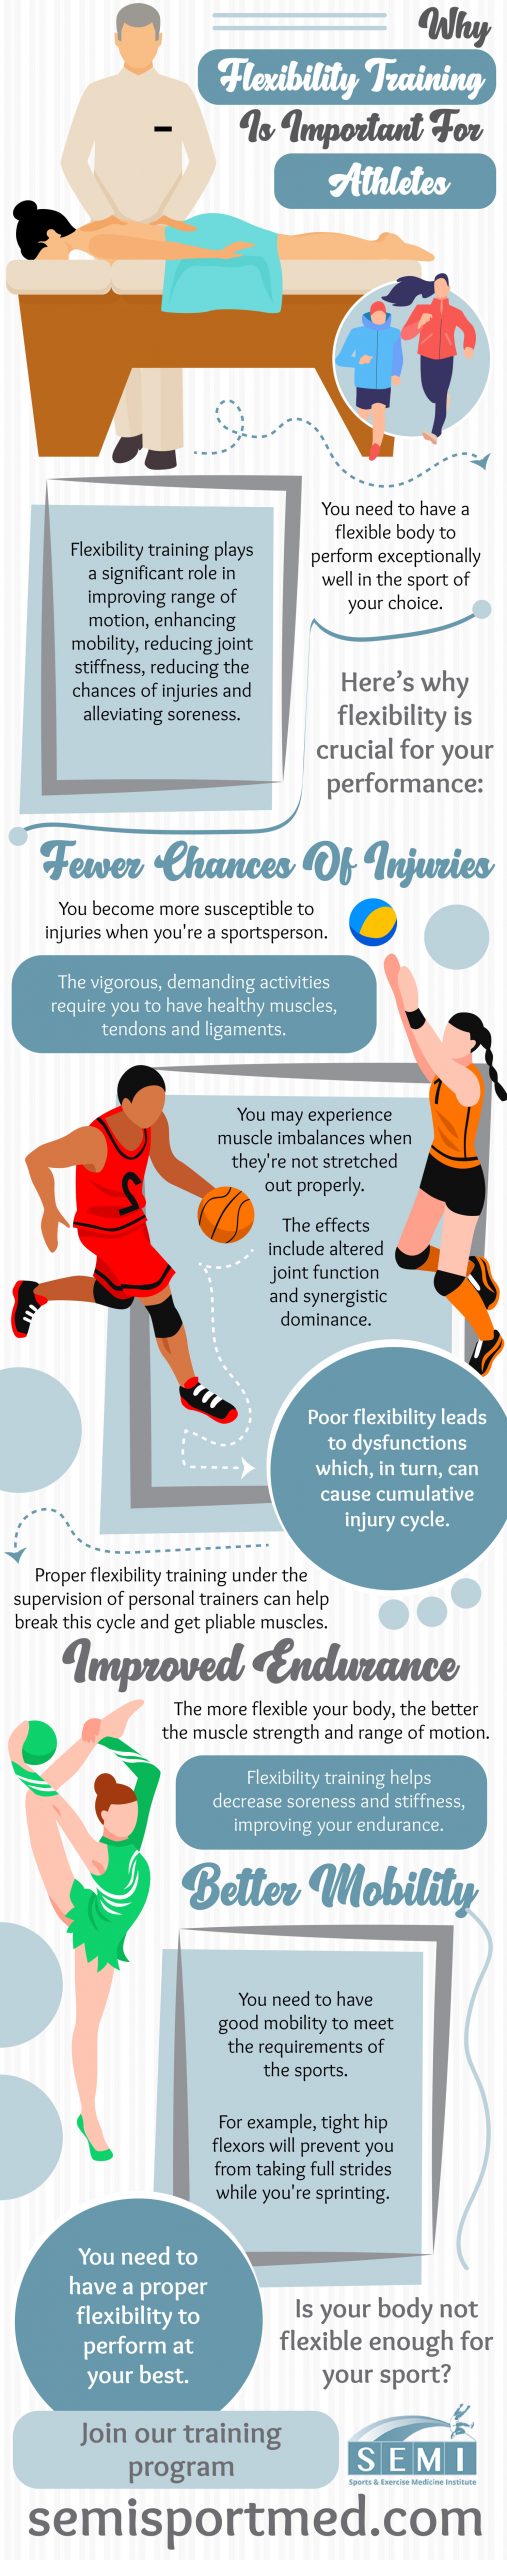 Why flexibility training is important for Athletes - Infographic ...